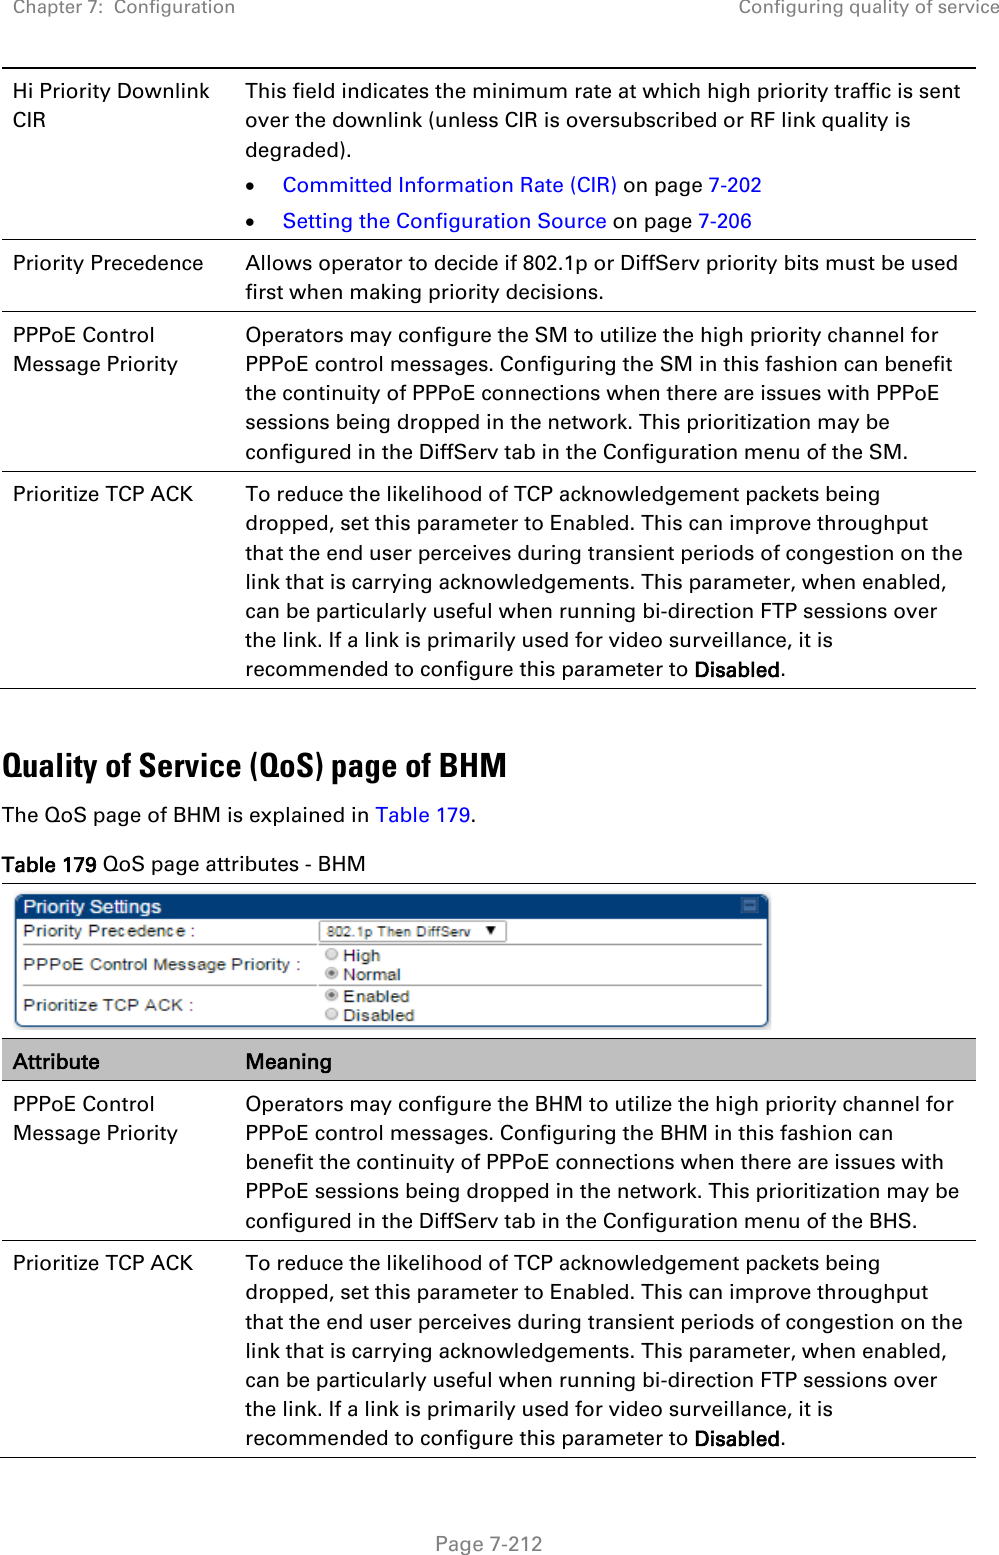 Chapter 7:  Configuration Configuring quality of service   Page 7-212 Hi Priority Downlink CIR This field indicates the minimum rate at which high priority traffic is sent over the downlink (unless CIR is oversubscribed or RF link quality is degraded). • Committed Information Rate (CIR) on page 7-202 • Setting the Configuration Source on page 7-206 Priority Precedence Allows operator to decide if 802.1p or DiffServ priority bits must be used first when making priority decisions. PPPoE Control Message Priority Operators may configure the SM to utilize the high priority channel for PPPoE control messages. Configuring the SM in this fashion can benefit the continuity of PPPoE connections when there are issues with PPPoE sessions being dropped in the network. This prioritization may be configured in the DiffServ tab in the Configuration menu of the SM. Prioritize TCP ACK To reduce the likelihood of TCP acknowledgement packets being dropped, set this parameter to Enabled. This can improve throughput that the end user perceives during transient periods of congestion on the link that is carrying acknowledgements. This parameter, when enabled, can be particularly useful when running bi-direction FTP sessions over the link. If a link is primarily used for video surveillance, it is recommended to configure this parameter to Disabled.  Quality of Service (QoS) page of BHM The QoS page of BHM is explained in Table 179. Table 179 QoS page attributes - BHM  Attribute Meaning PPPoE Control Message Priority Operators may configure the BHM to utilize the high priority channel for PPPoE control messages. Configuring the BHM in this fashion can benefit the continuity of PPPoE connections when there are issues with PPPoE sessions being dropped in the network. This prioritization may be configured in the DiffServ tab in the Configuration menu of the BHS. Prioritize TCP ACK To reduce the likelihood of TCP acknowledgement packets being dropped, set this parameter to Enabled. This can improve throughput that the end user perceives during transient periods of congestion on the link that is carrying acknowledgements. This parameter, when enabled, can be particularly useful when running bi-direction FTP sessions over the link. If a link is primarily used for video surveillance, it is recommended to configure this parameter to Disabled. 